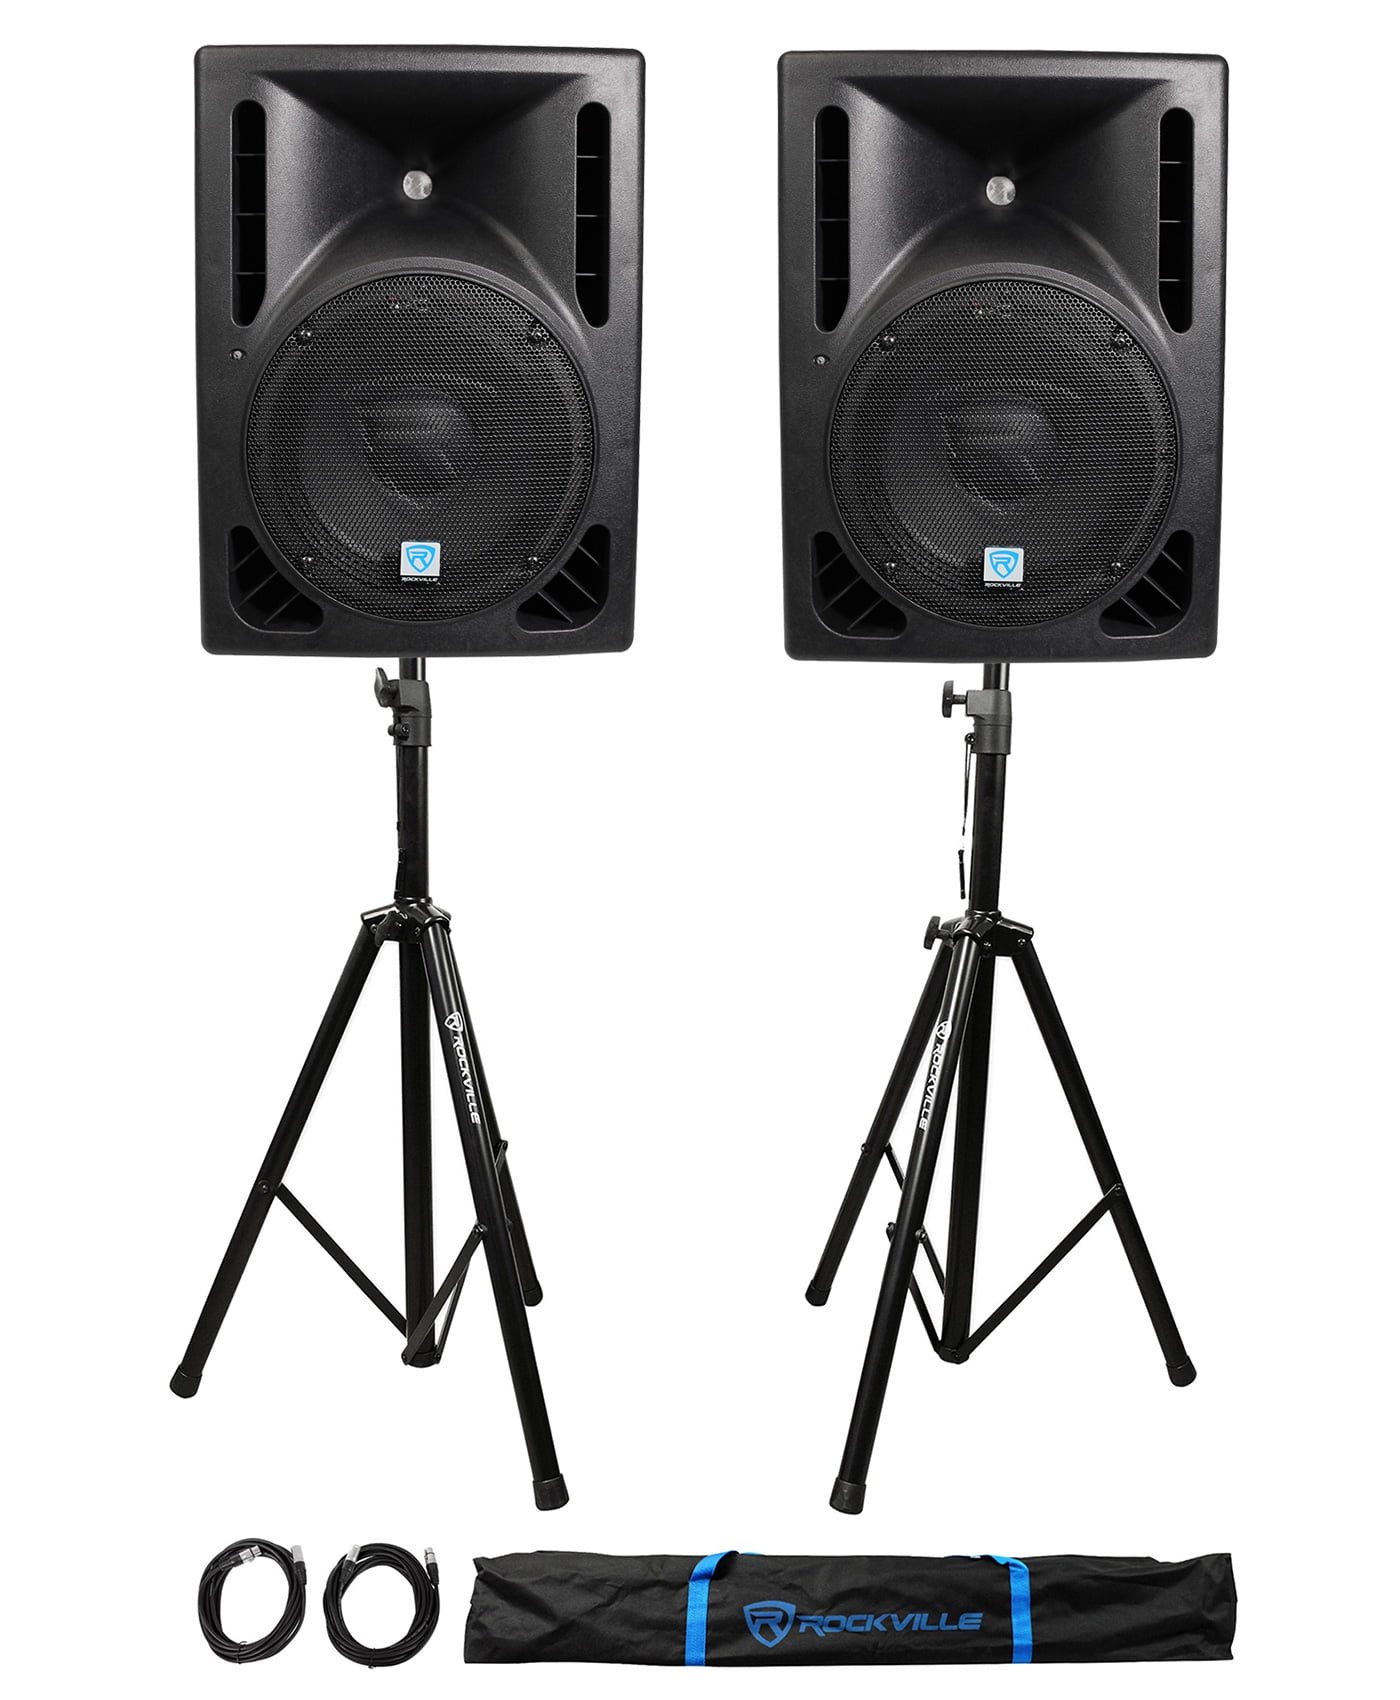 2 Cables+Bag 2 Stands Pair Rockville RPG10 10 1200w Powered PA/DJ Speakers 